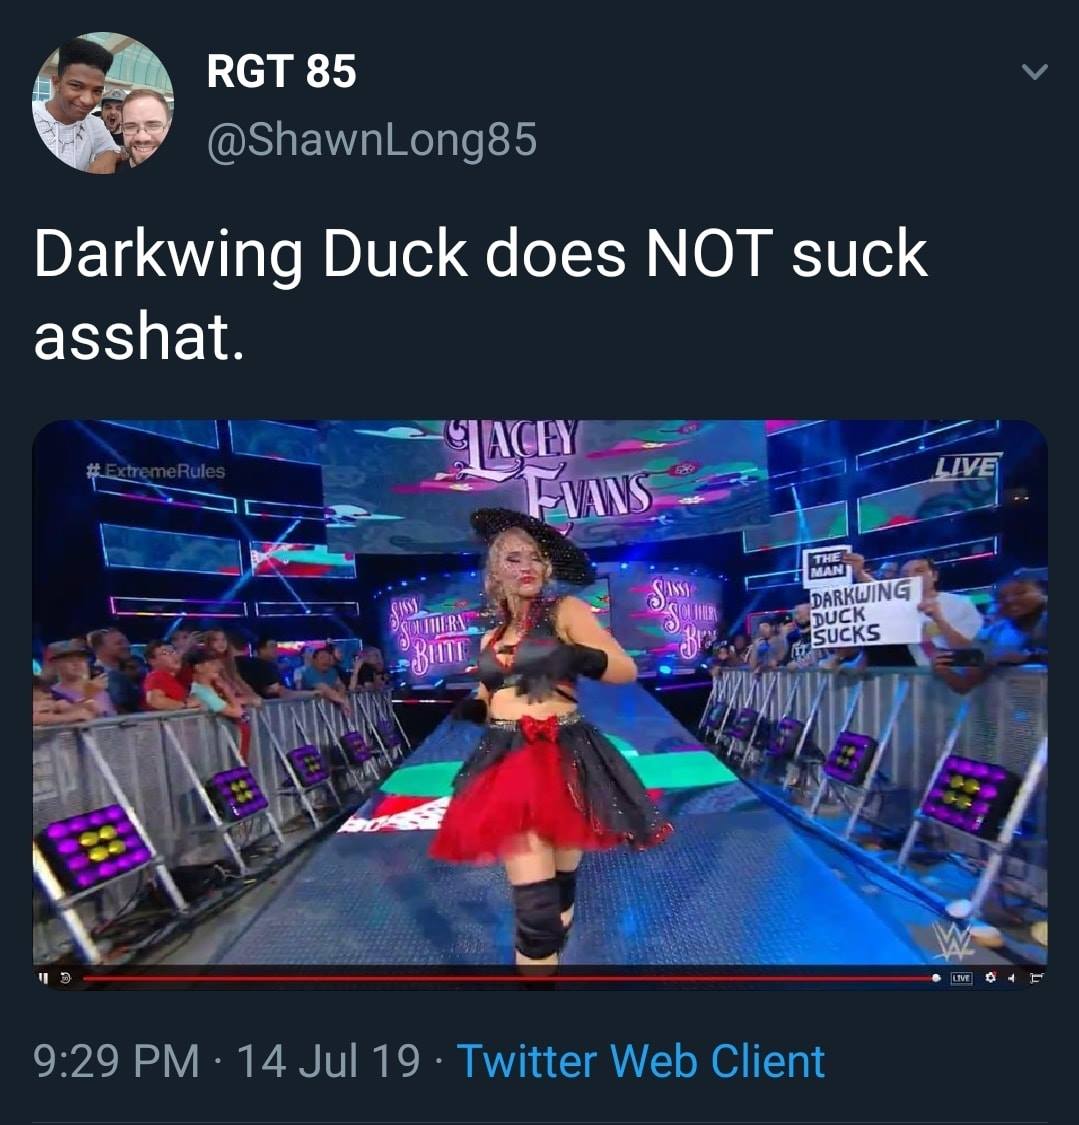 WWE wrestling memes - competition - Rgt 85 Darkwing Duck does Not suck asshat. ExtremeRules Tacey Evans Outhera Butt Sans The Man Darkwing Duck Sucks 14 Jul 19 Twitter Web Client D Live Live 04 F